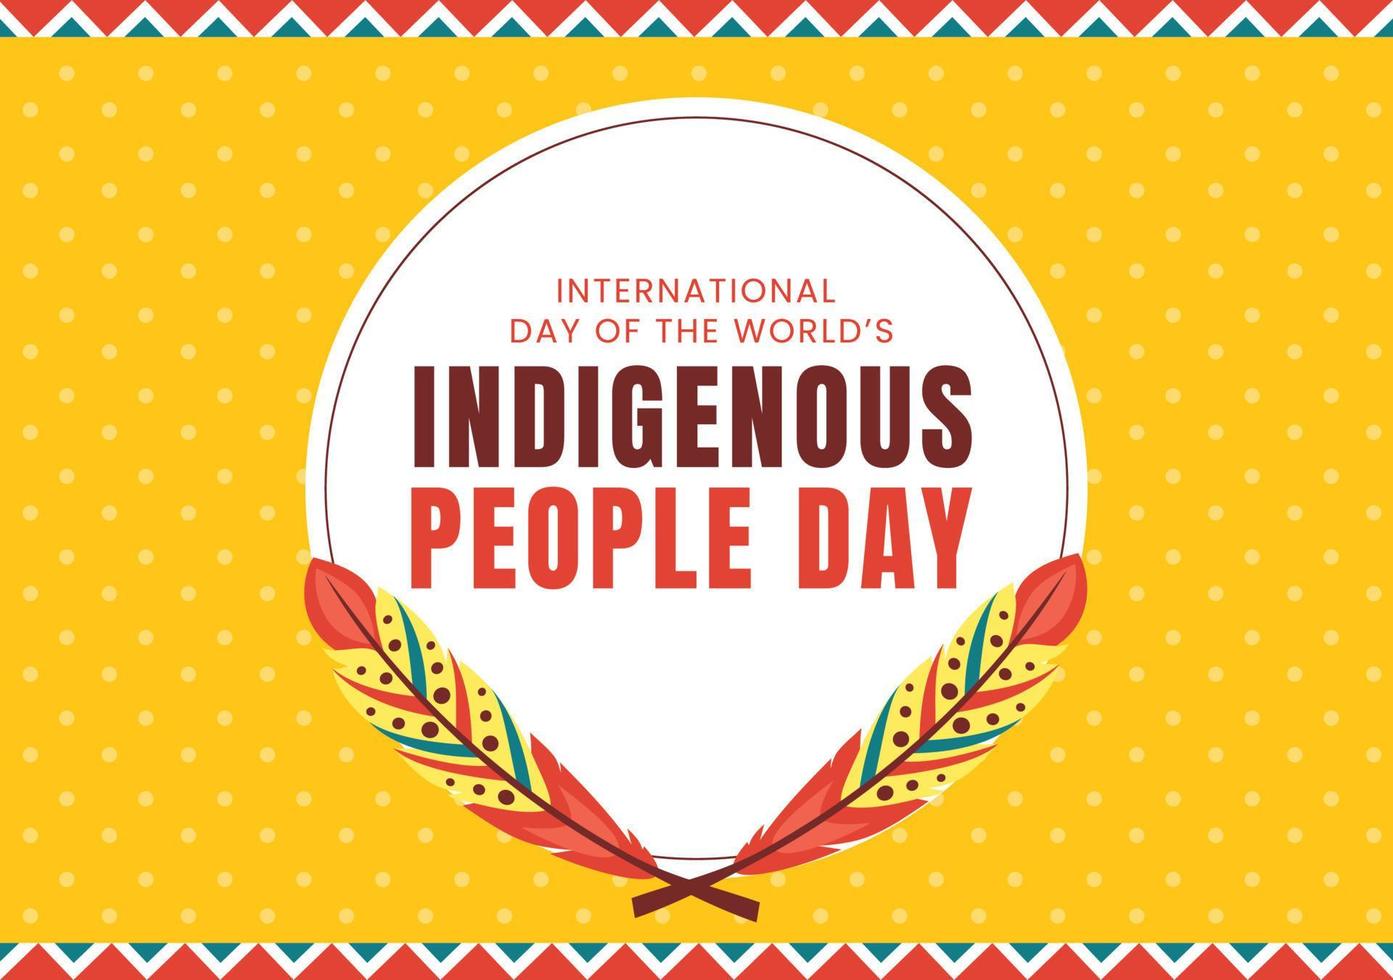 Worlds Indigenous Peoples Day on August 9 Hand Drawn Cartoon Flat Illustration to Raise Awareness and Protect the Rights Population vector